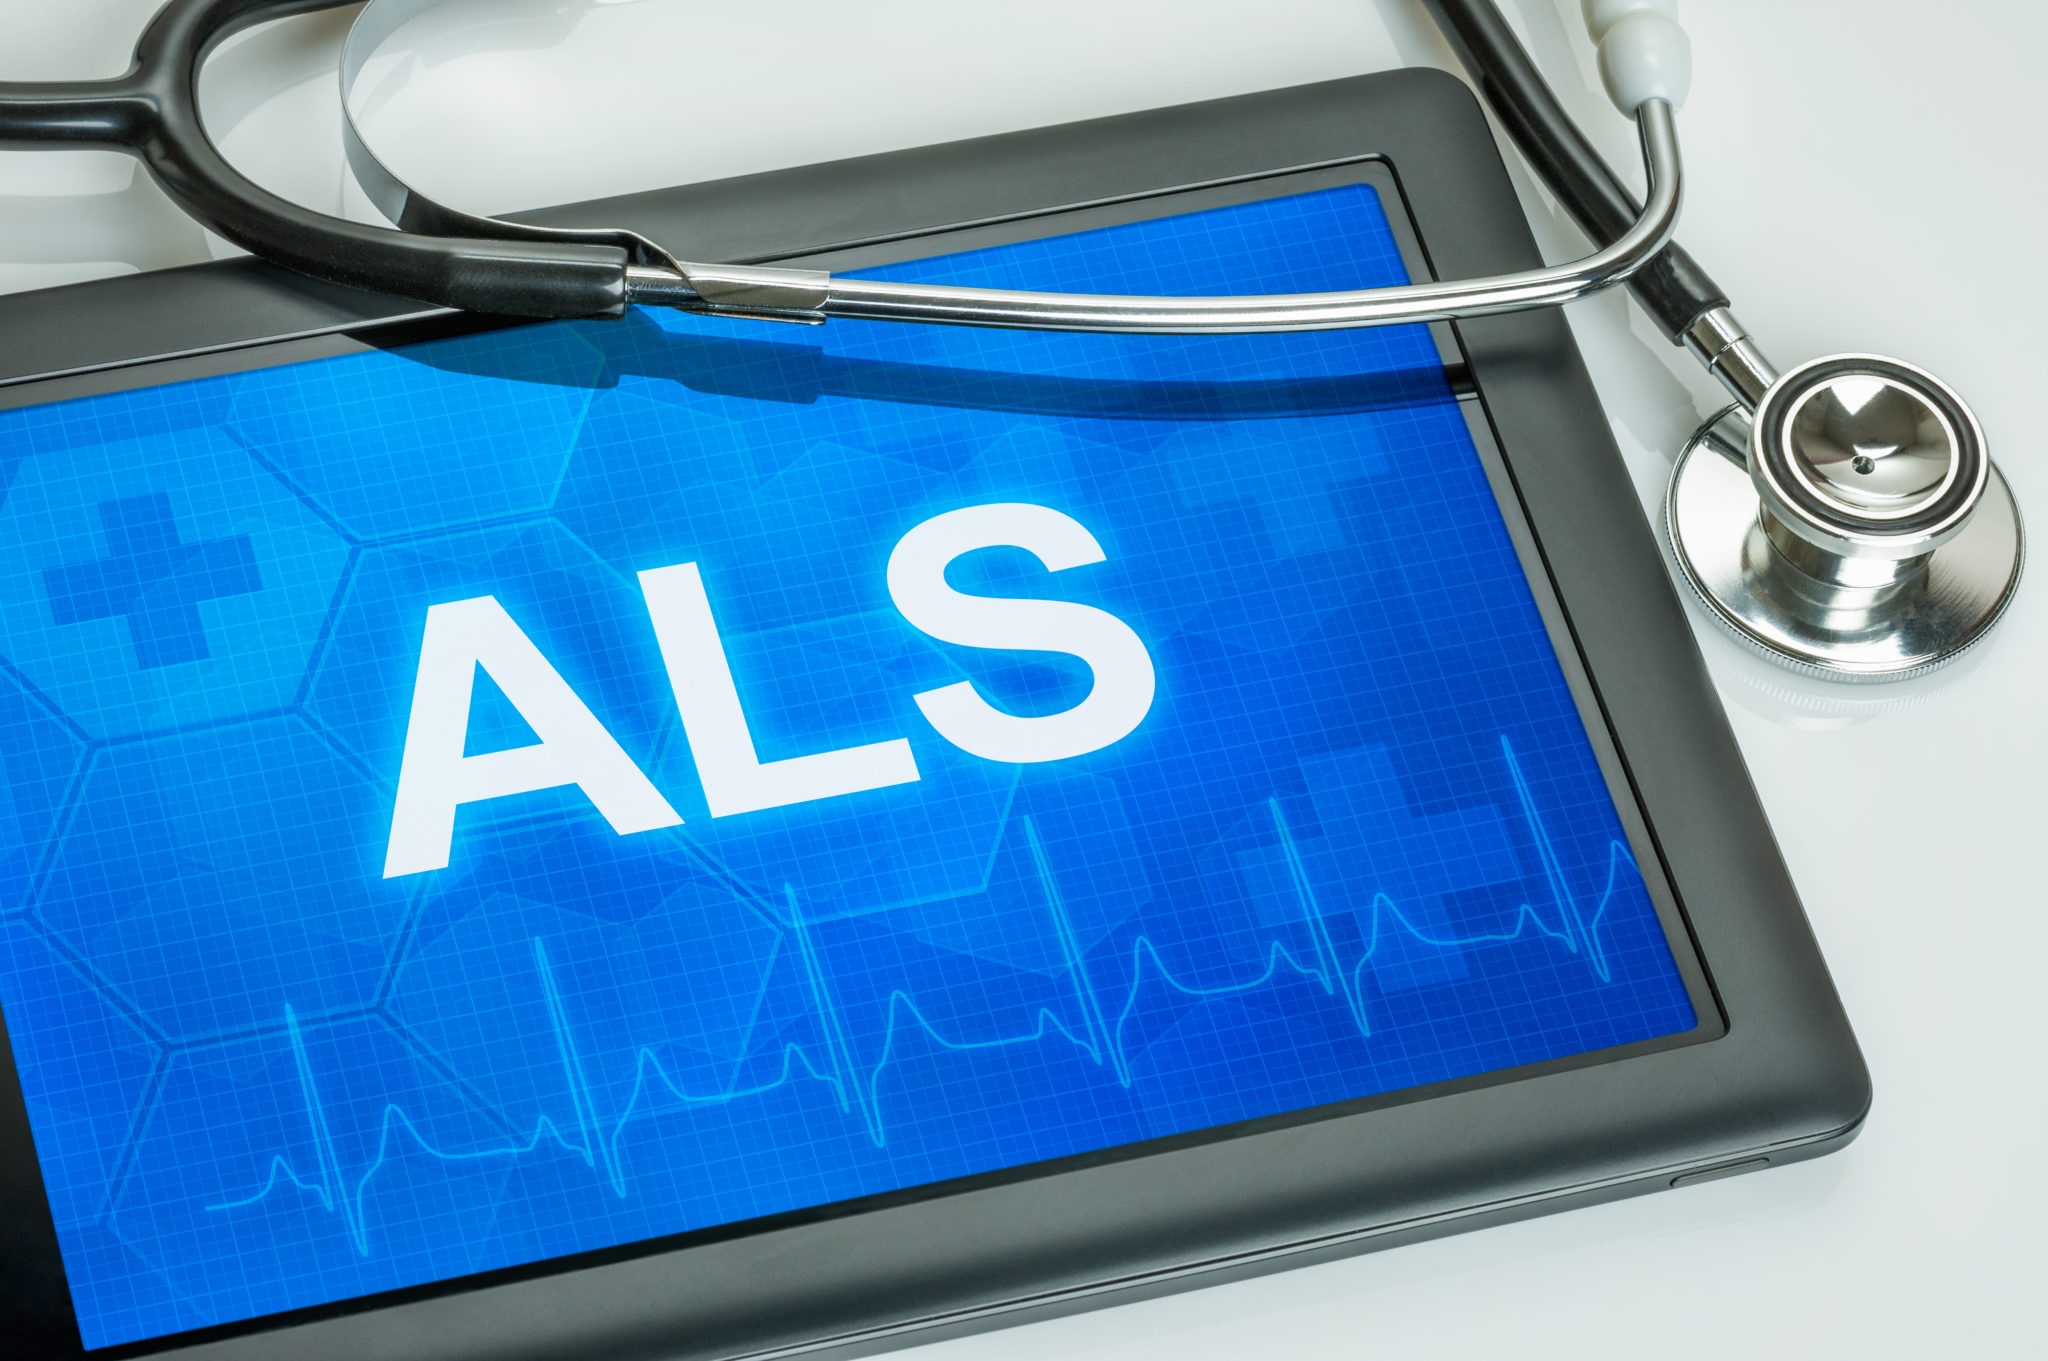 The Facts on ALS